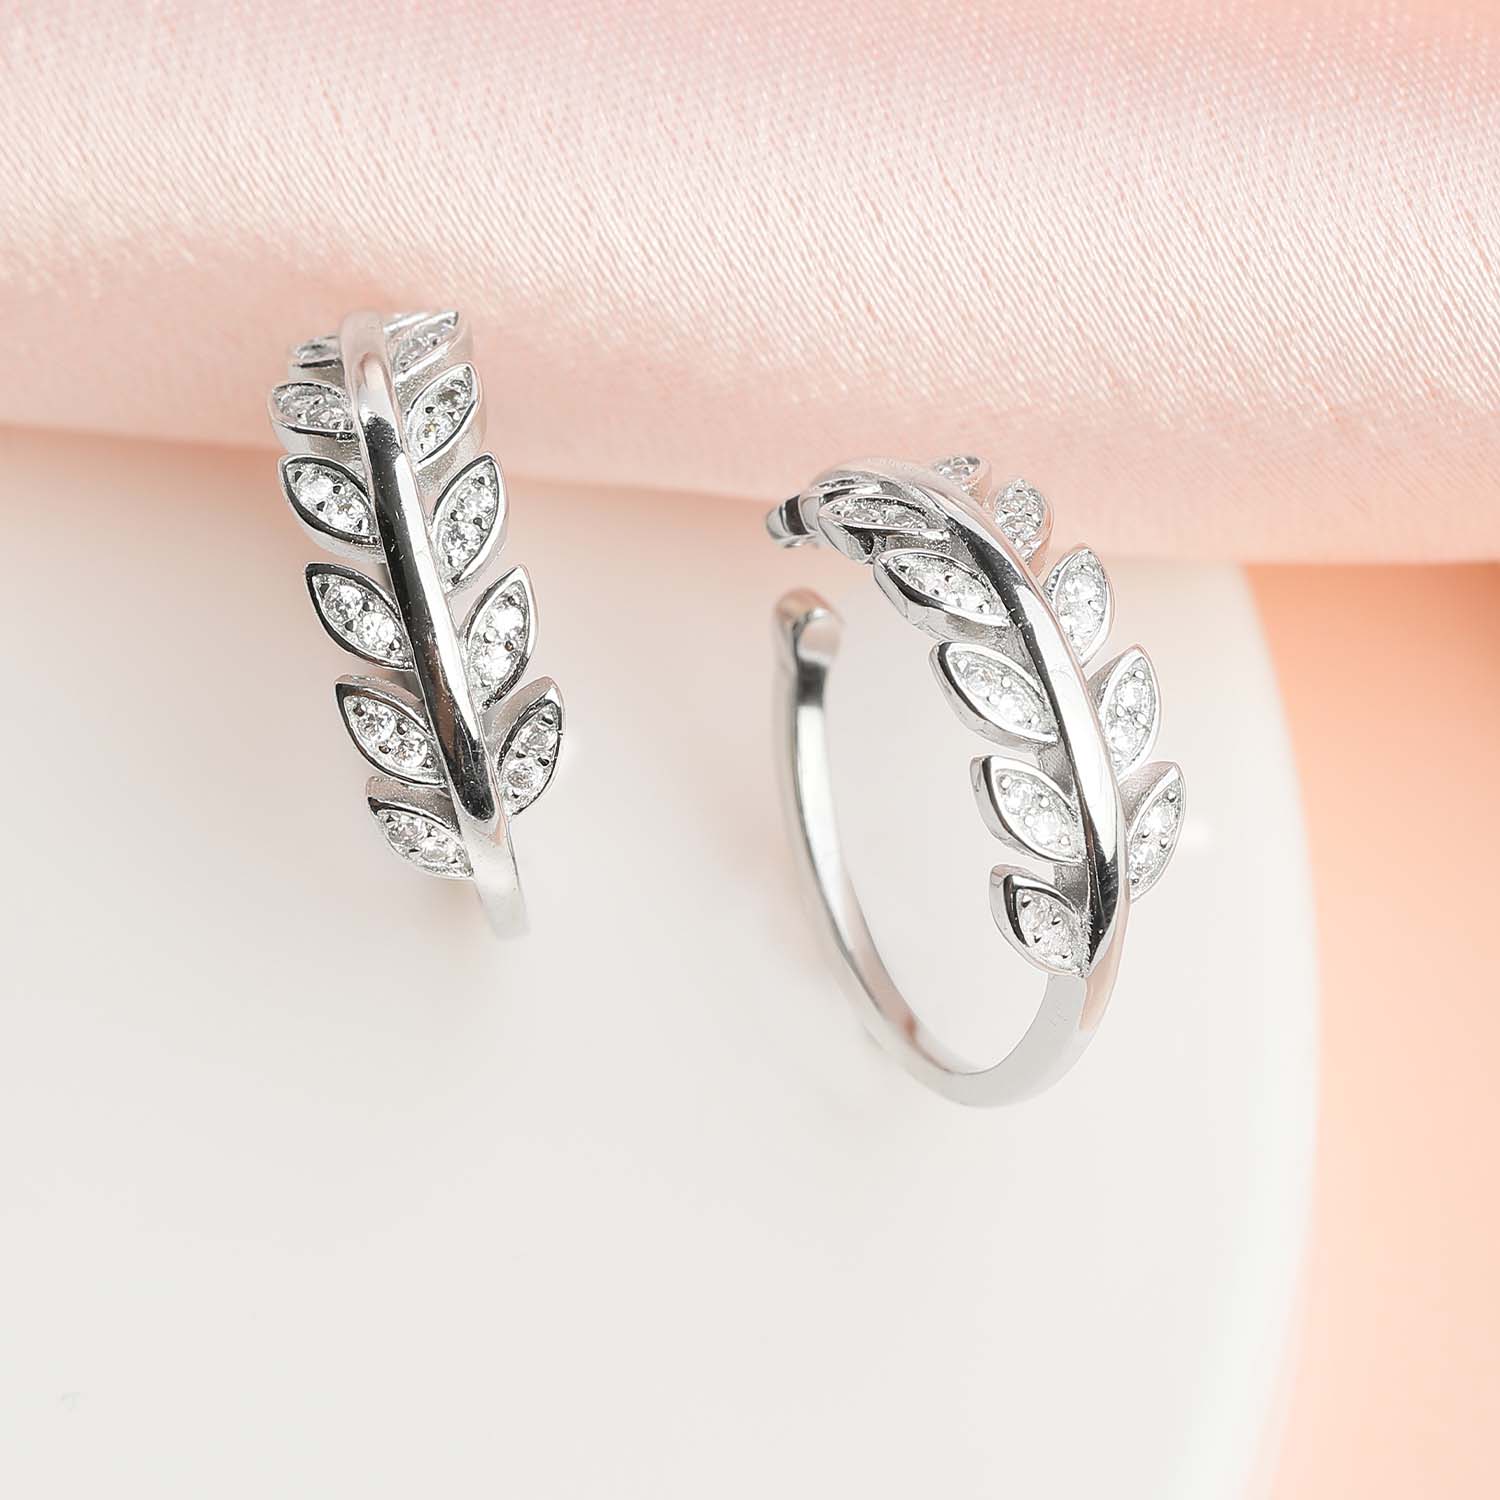 100% Wedding Wear 9g Traditional Silver Toe Ring at Rs 600/pair in Chennai